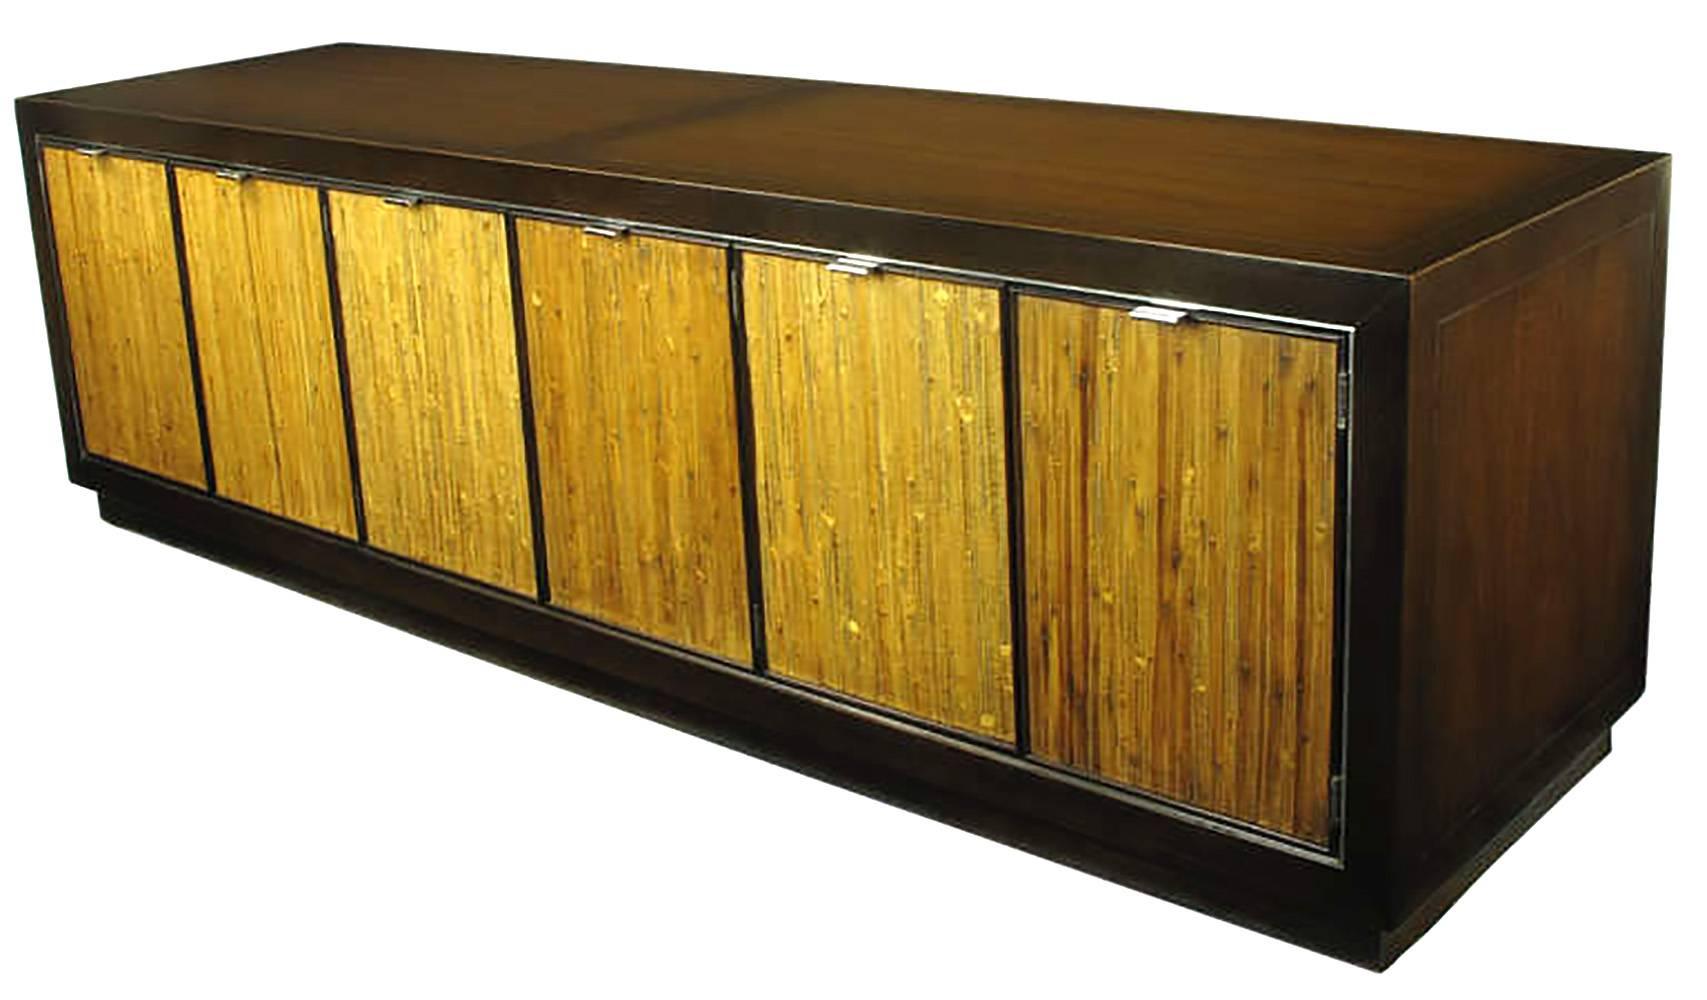 Dark walnut low cabinet with grass cloth inlaid doors in the manner of Harvey Probber. Double doors open to reveal an illuminated center section, right and left sections feature black leather like covered drawers. Finished on all sides with incised